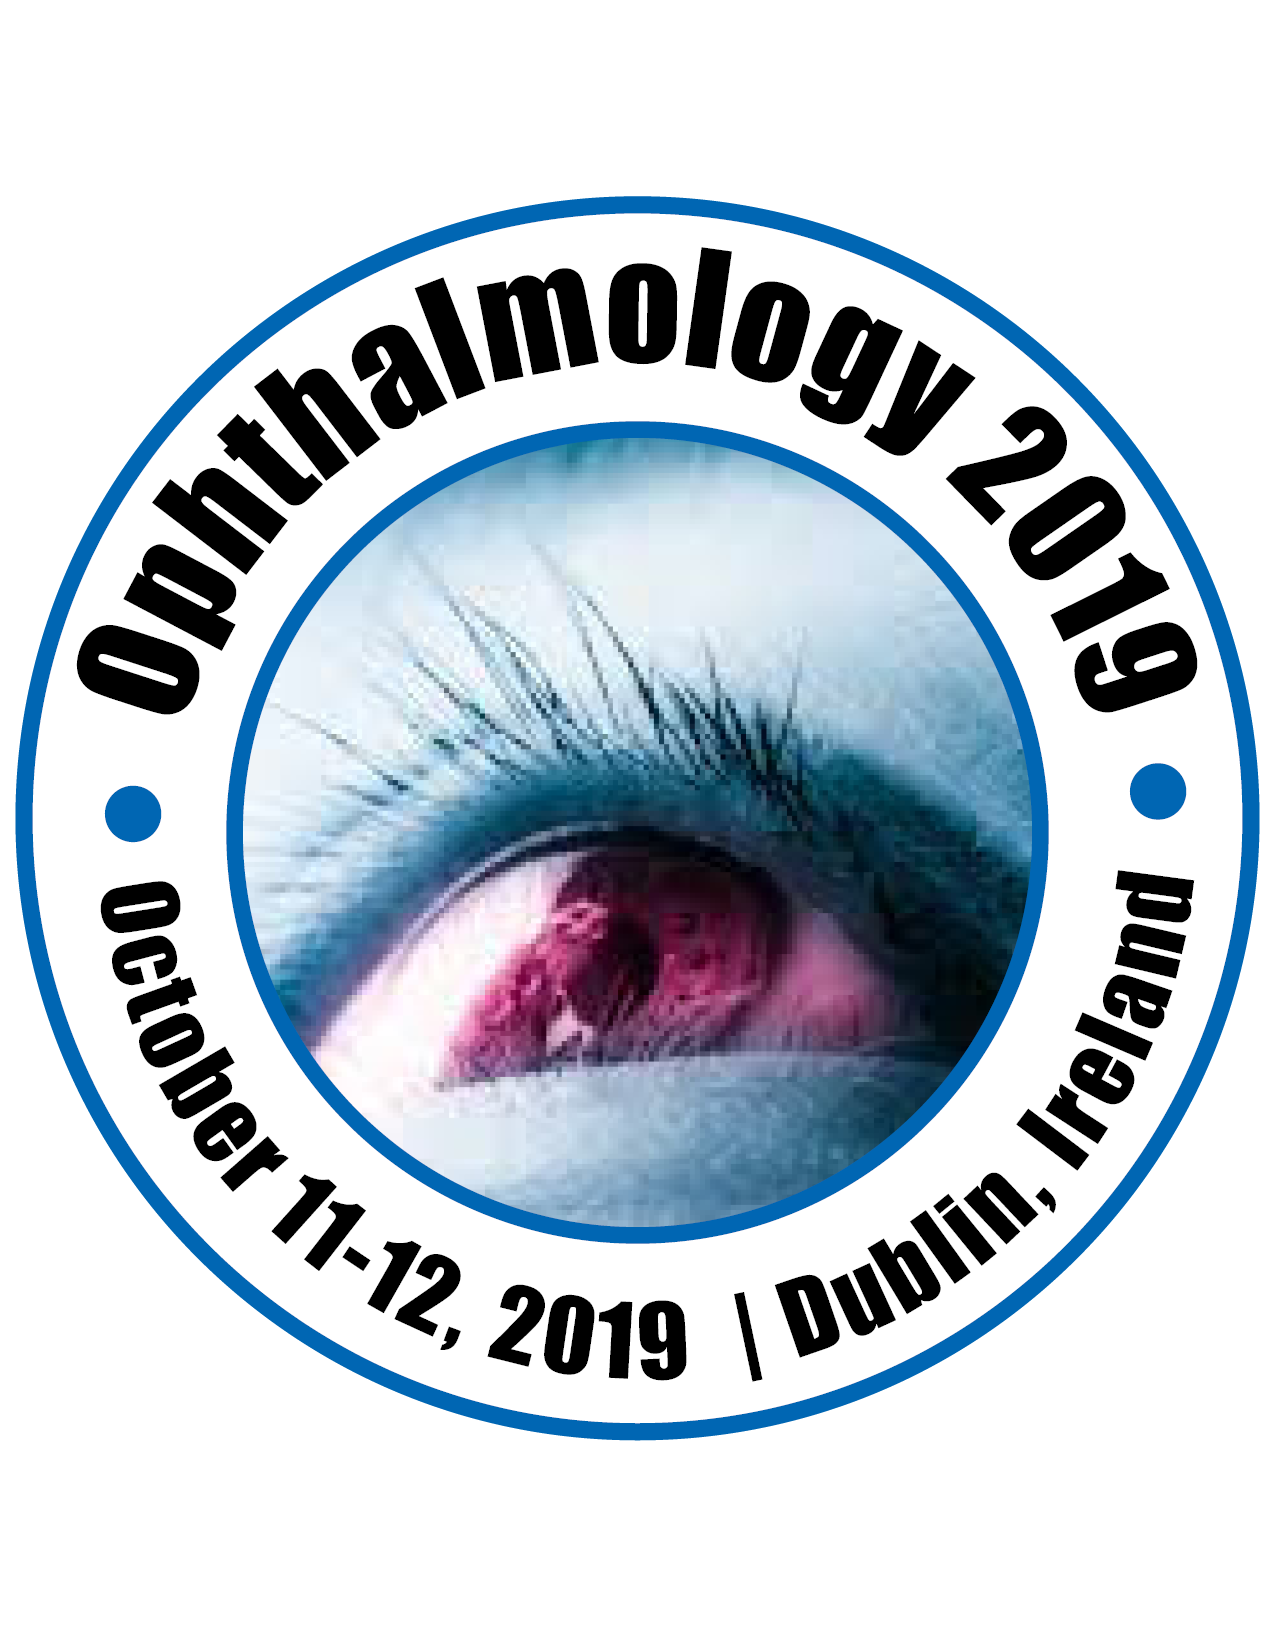 30th International Conference on Clinical and Experimental Ophthalmology 